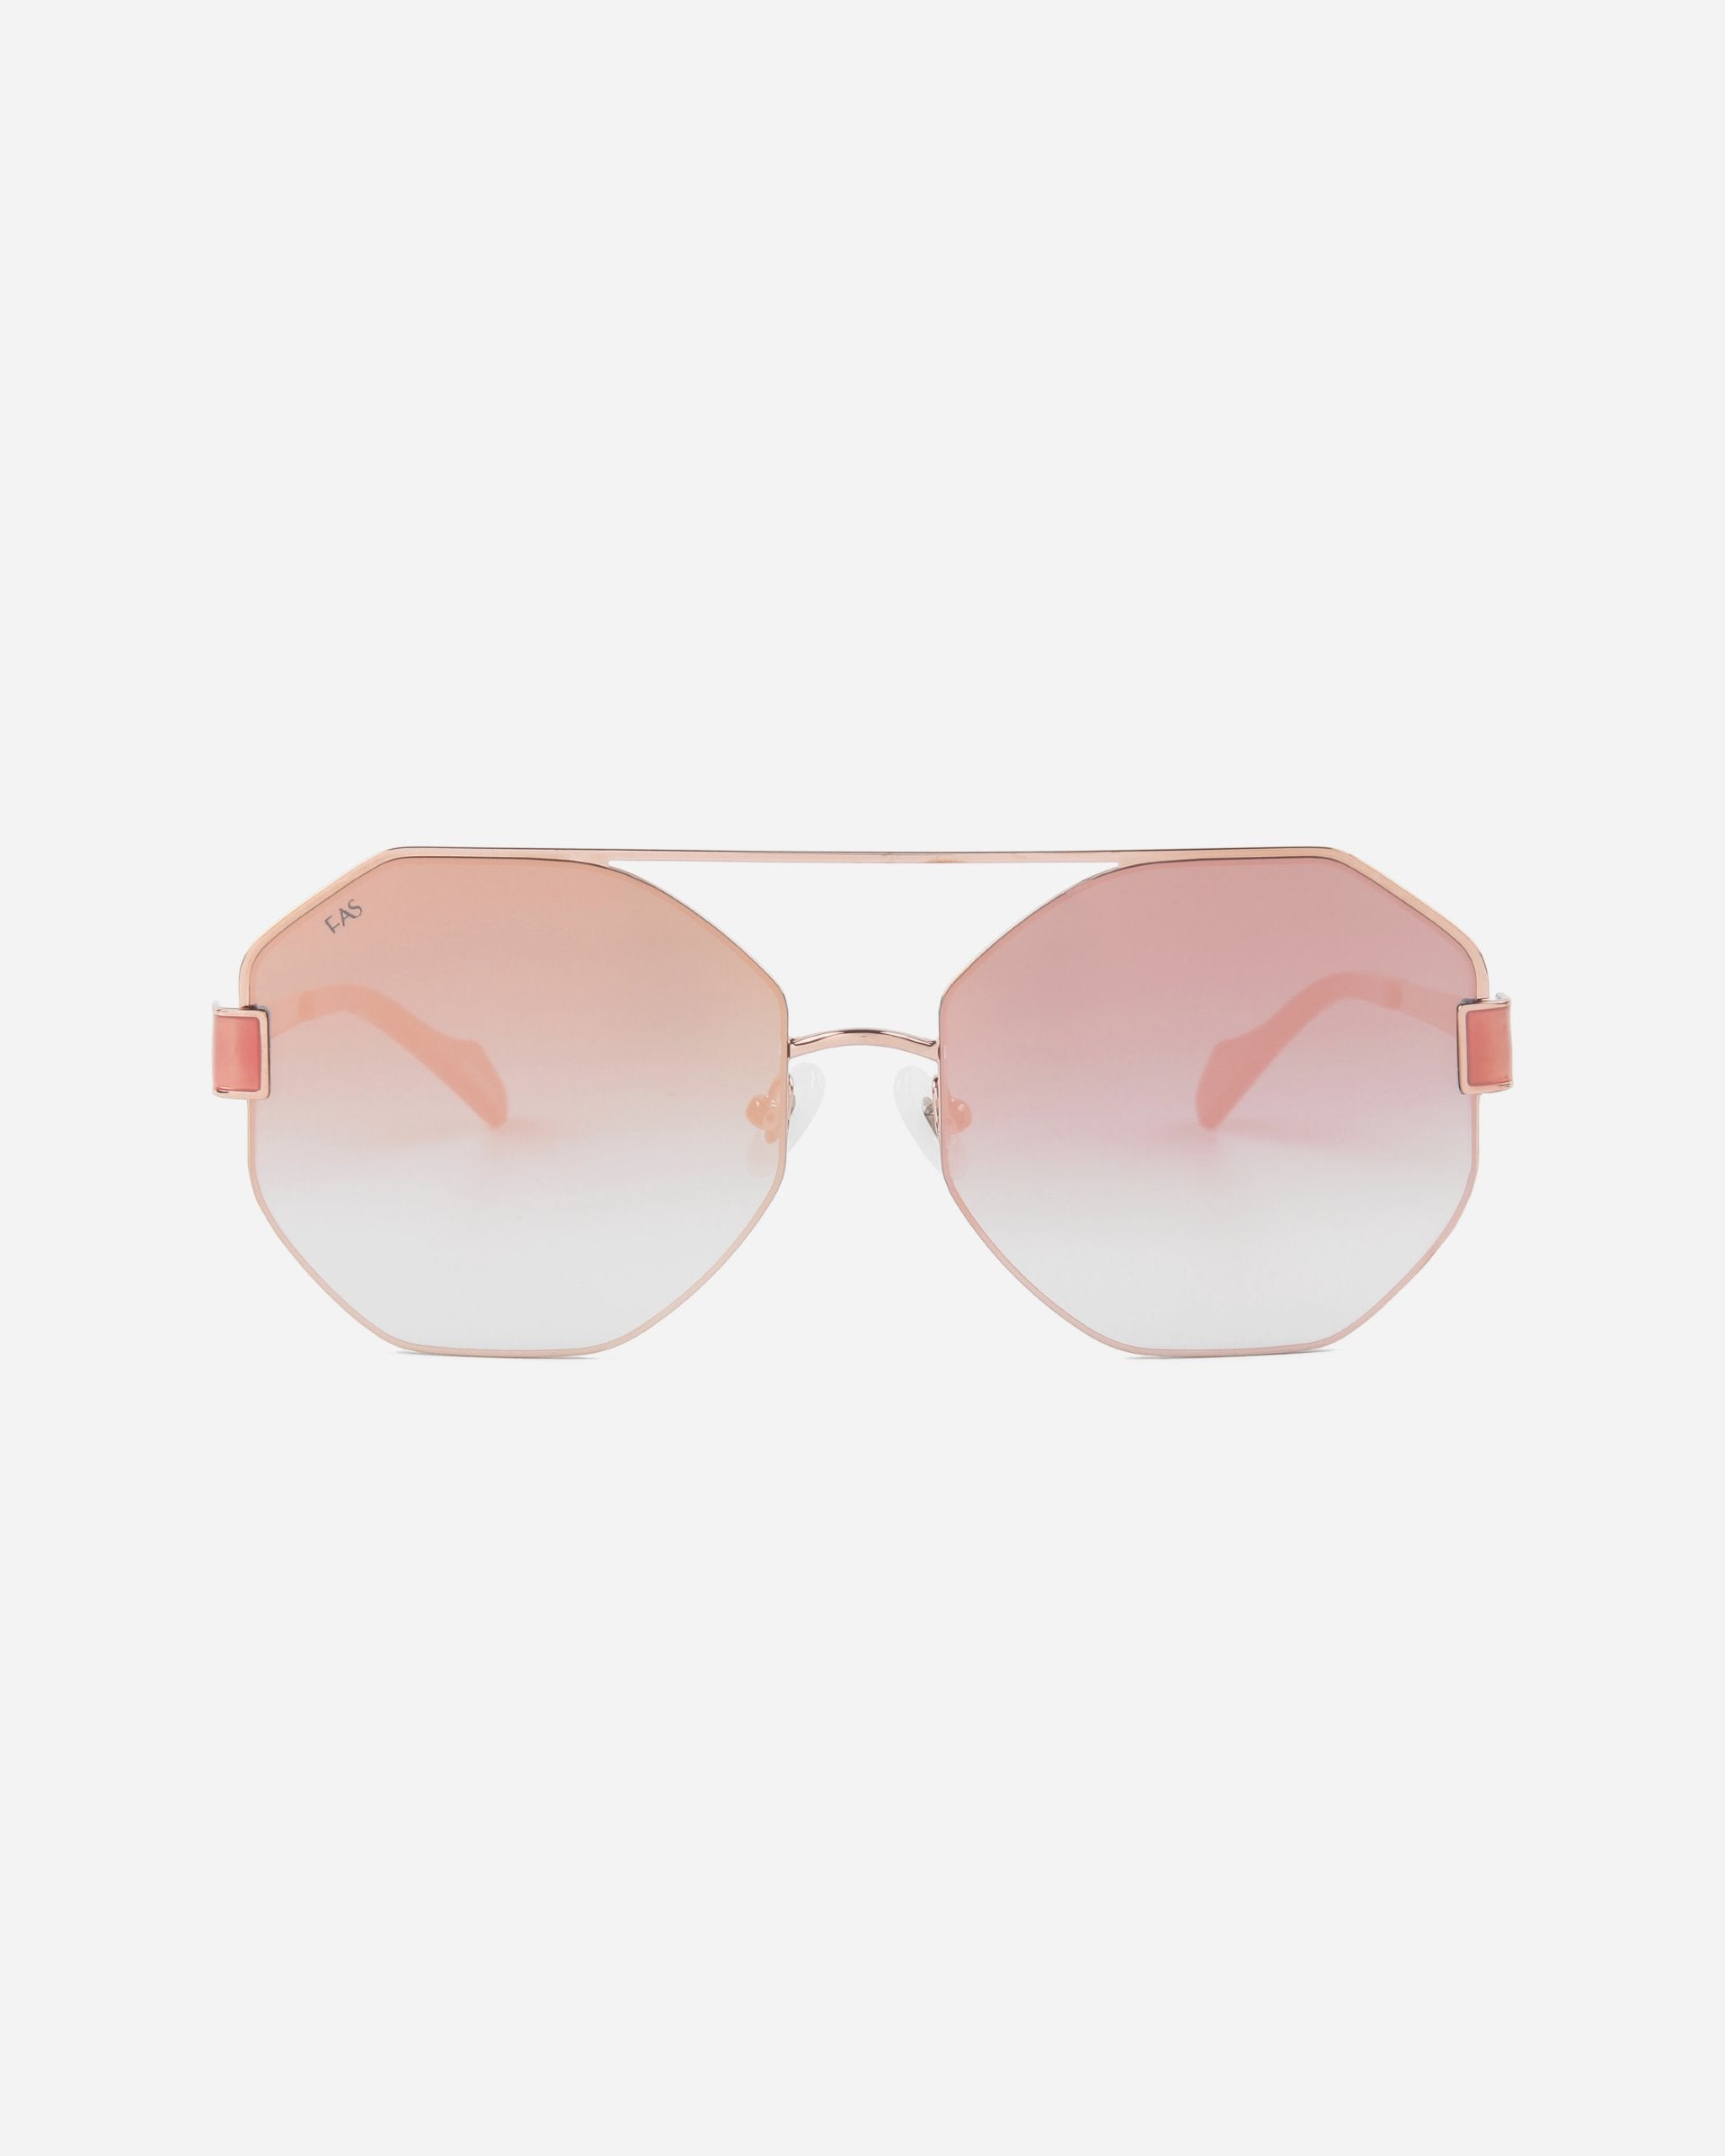 A pair of For Art&#39;s Sake® Mania sunglasses with rose-tinted gradient nylon lenses and thin 18-karat gold-plated frames. The lenses are hexagonal in shape, and there are pink accents on the sides of the frames near the hinges. The background is plain white.